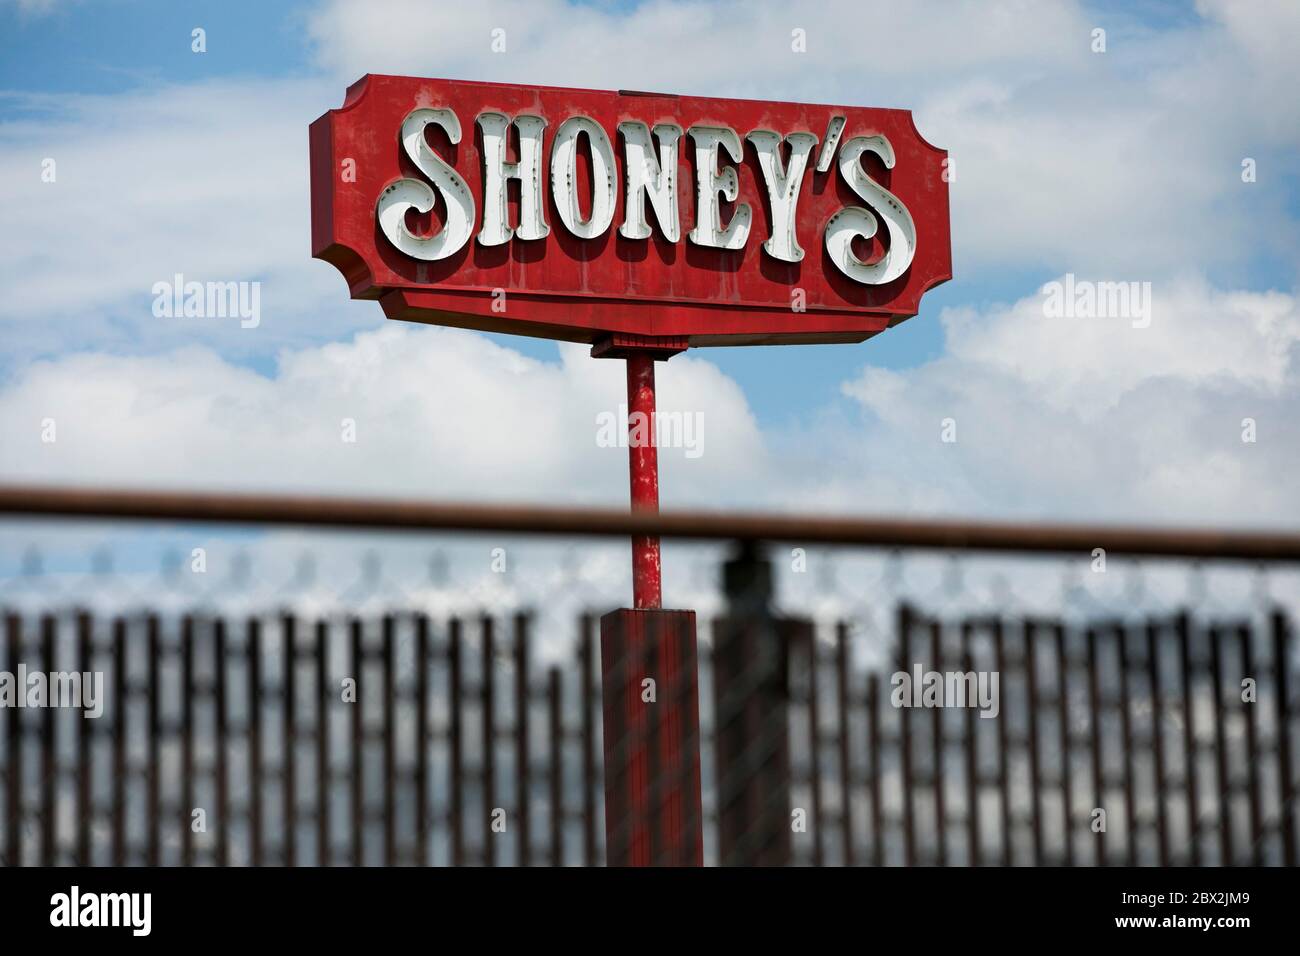 A logo sign outside of a Shoney's restaurant location in Sutton, West Virginia on May 29, 2020. Stock Photo